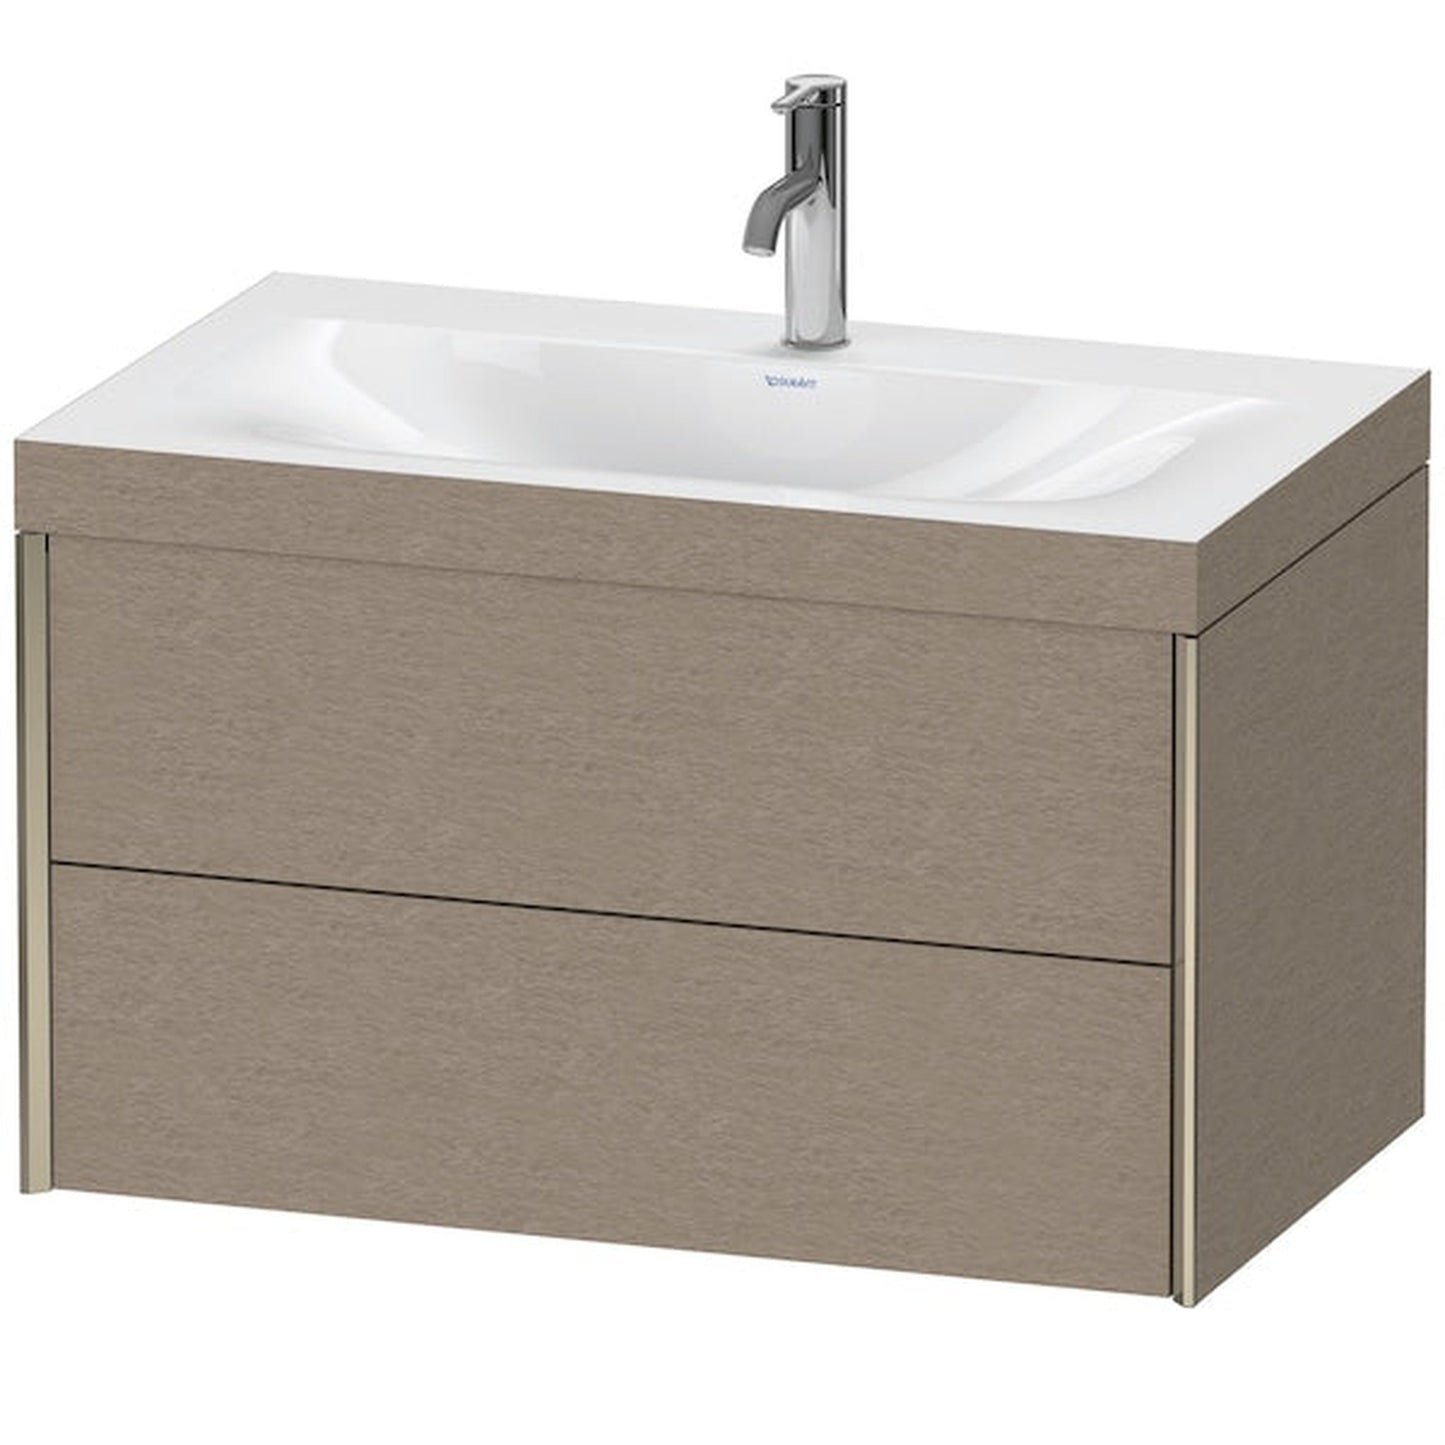 Duravit Xviu 31" x 20" x 19" Two Drawer C-Bonded Wall-Mount Vanity Kit With One Tap Hole, Cashmere Oak (XV4615OB111C)